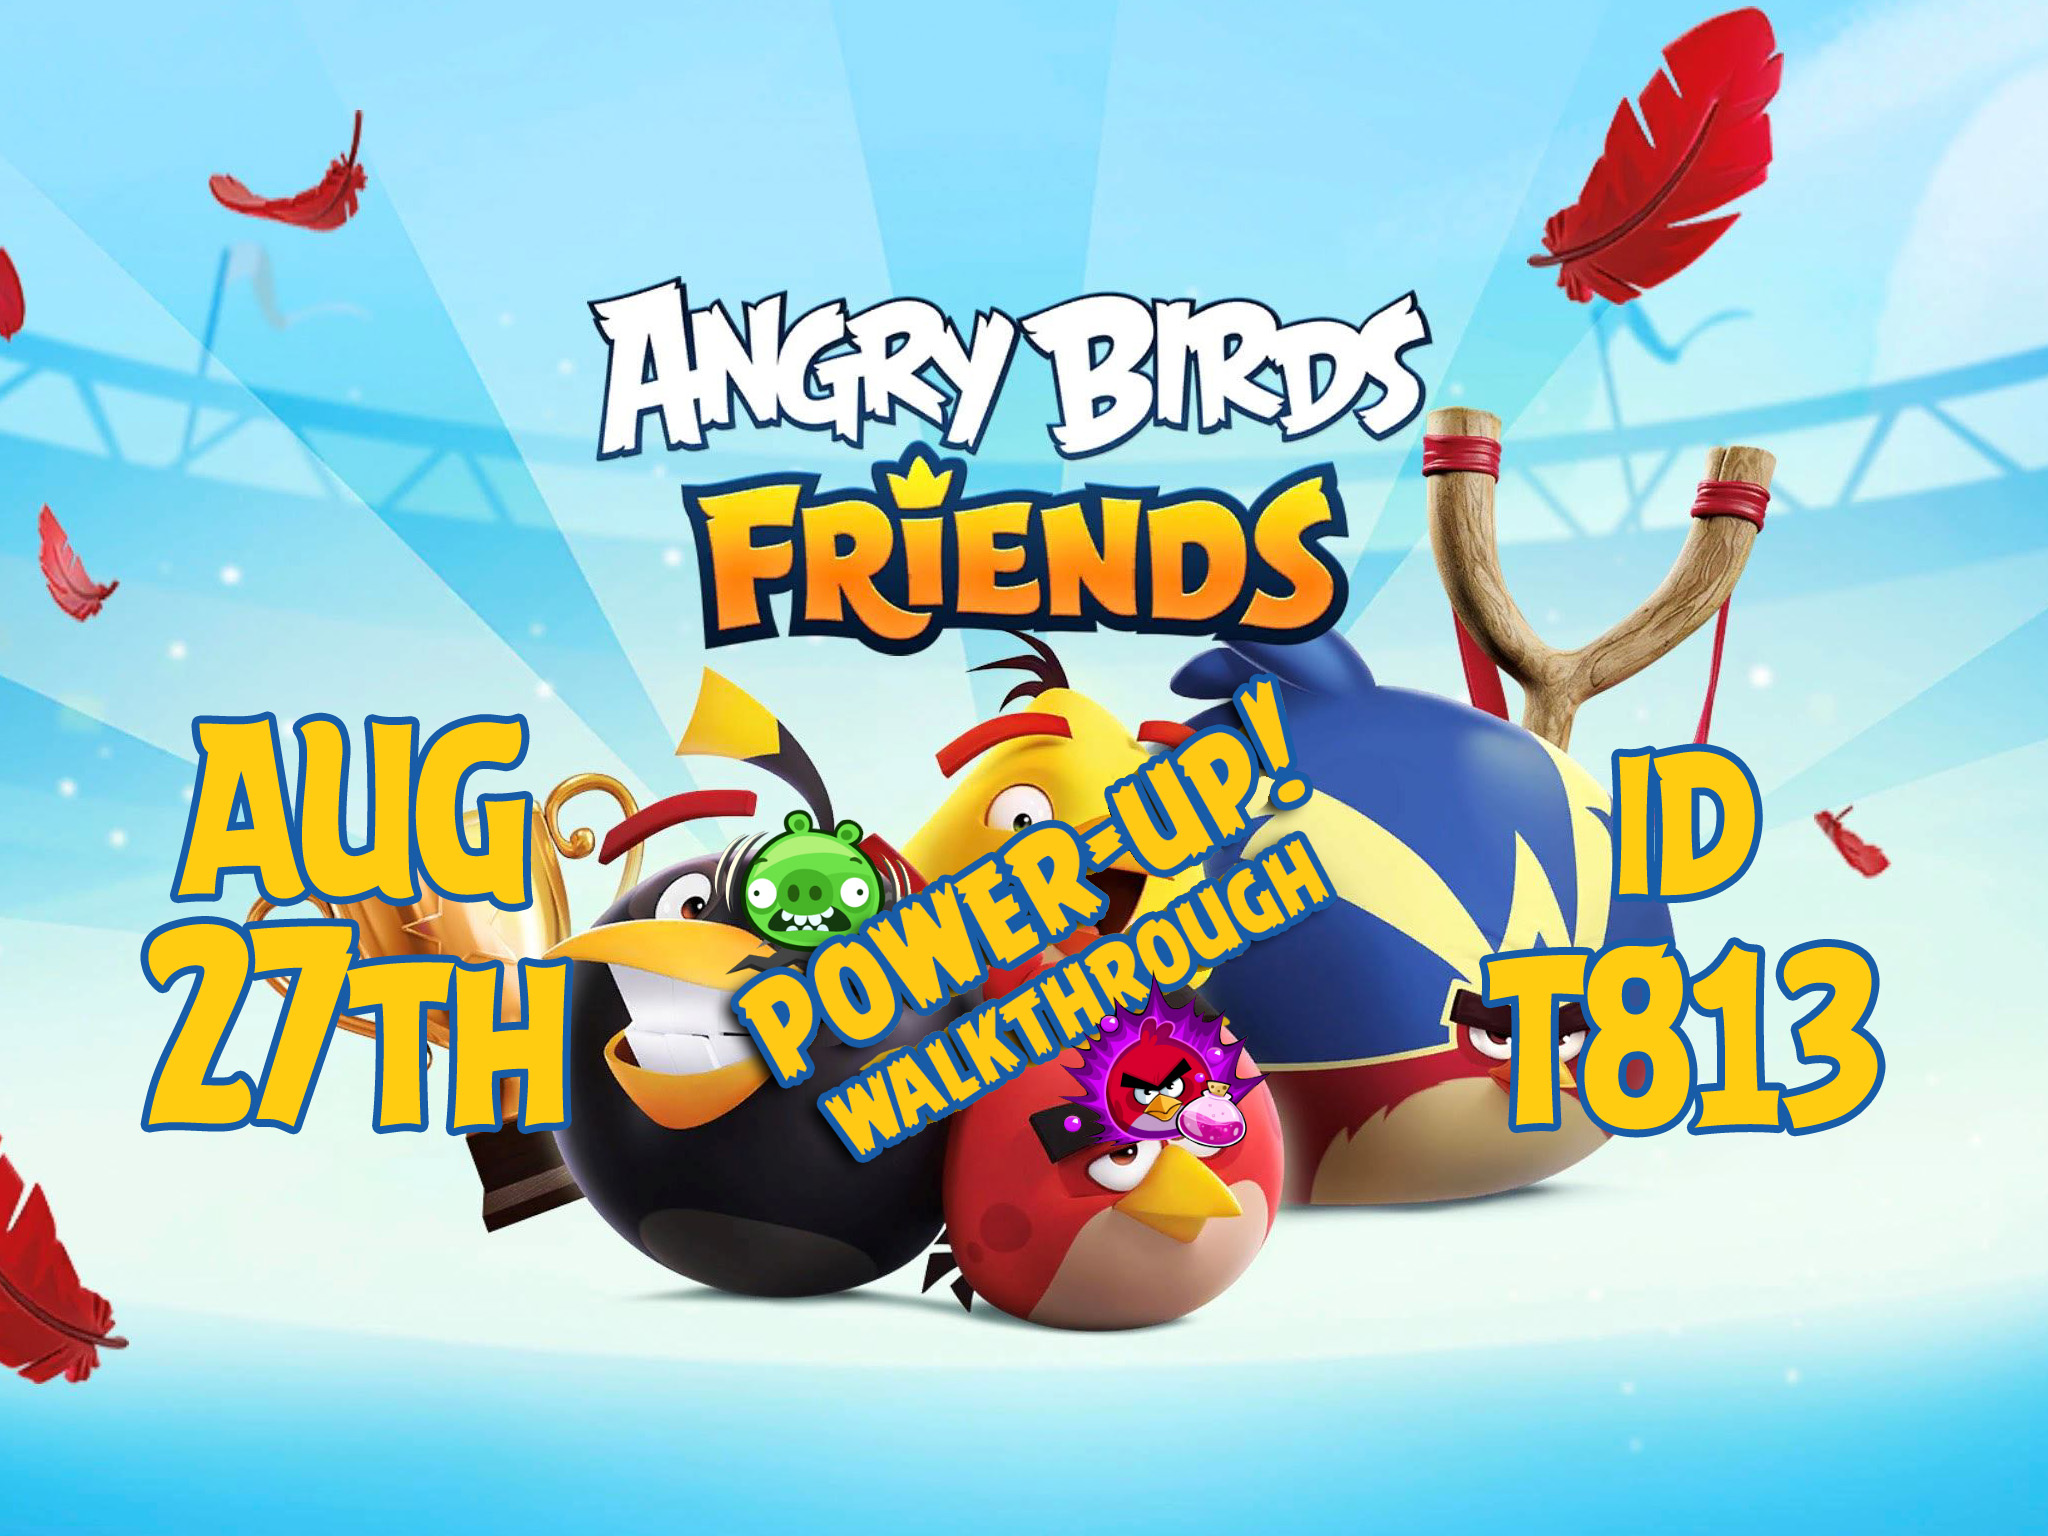 Angry-Birds-Friends-Tournament-T813-Feature-Image-PU